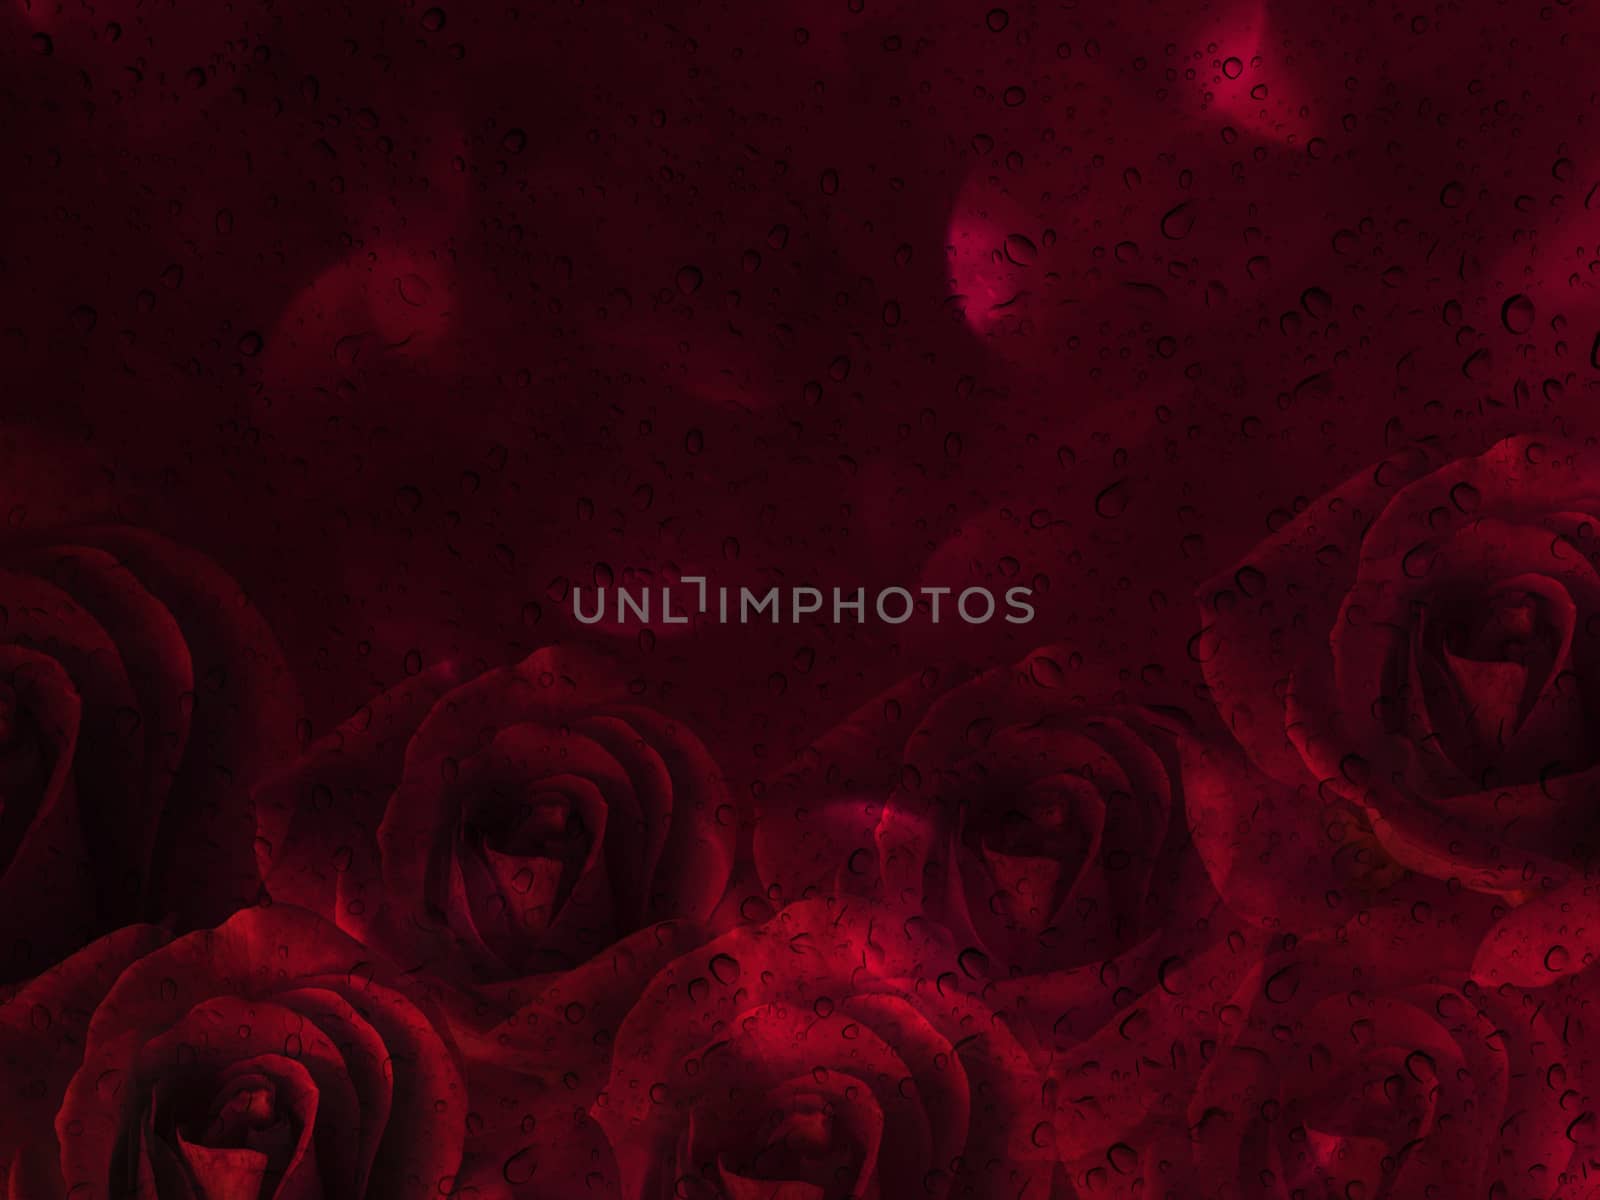 Romantic red roses and water drop abstract valentine background